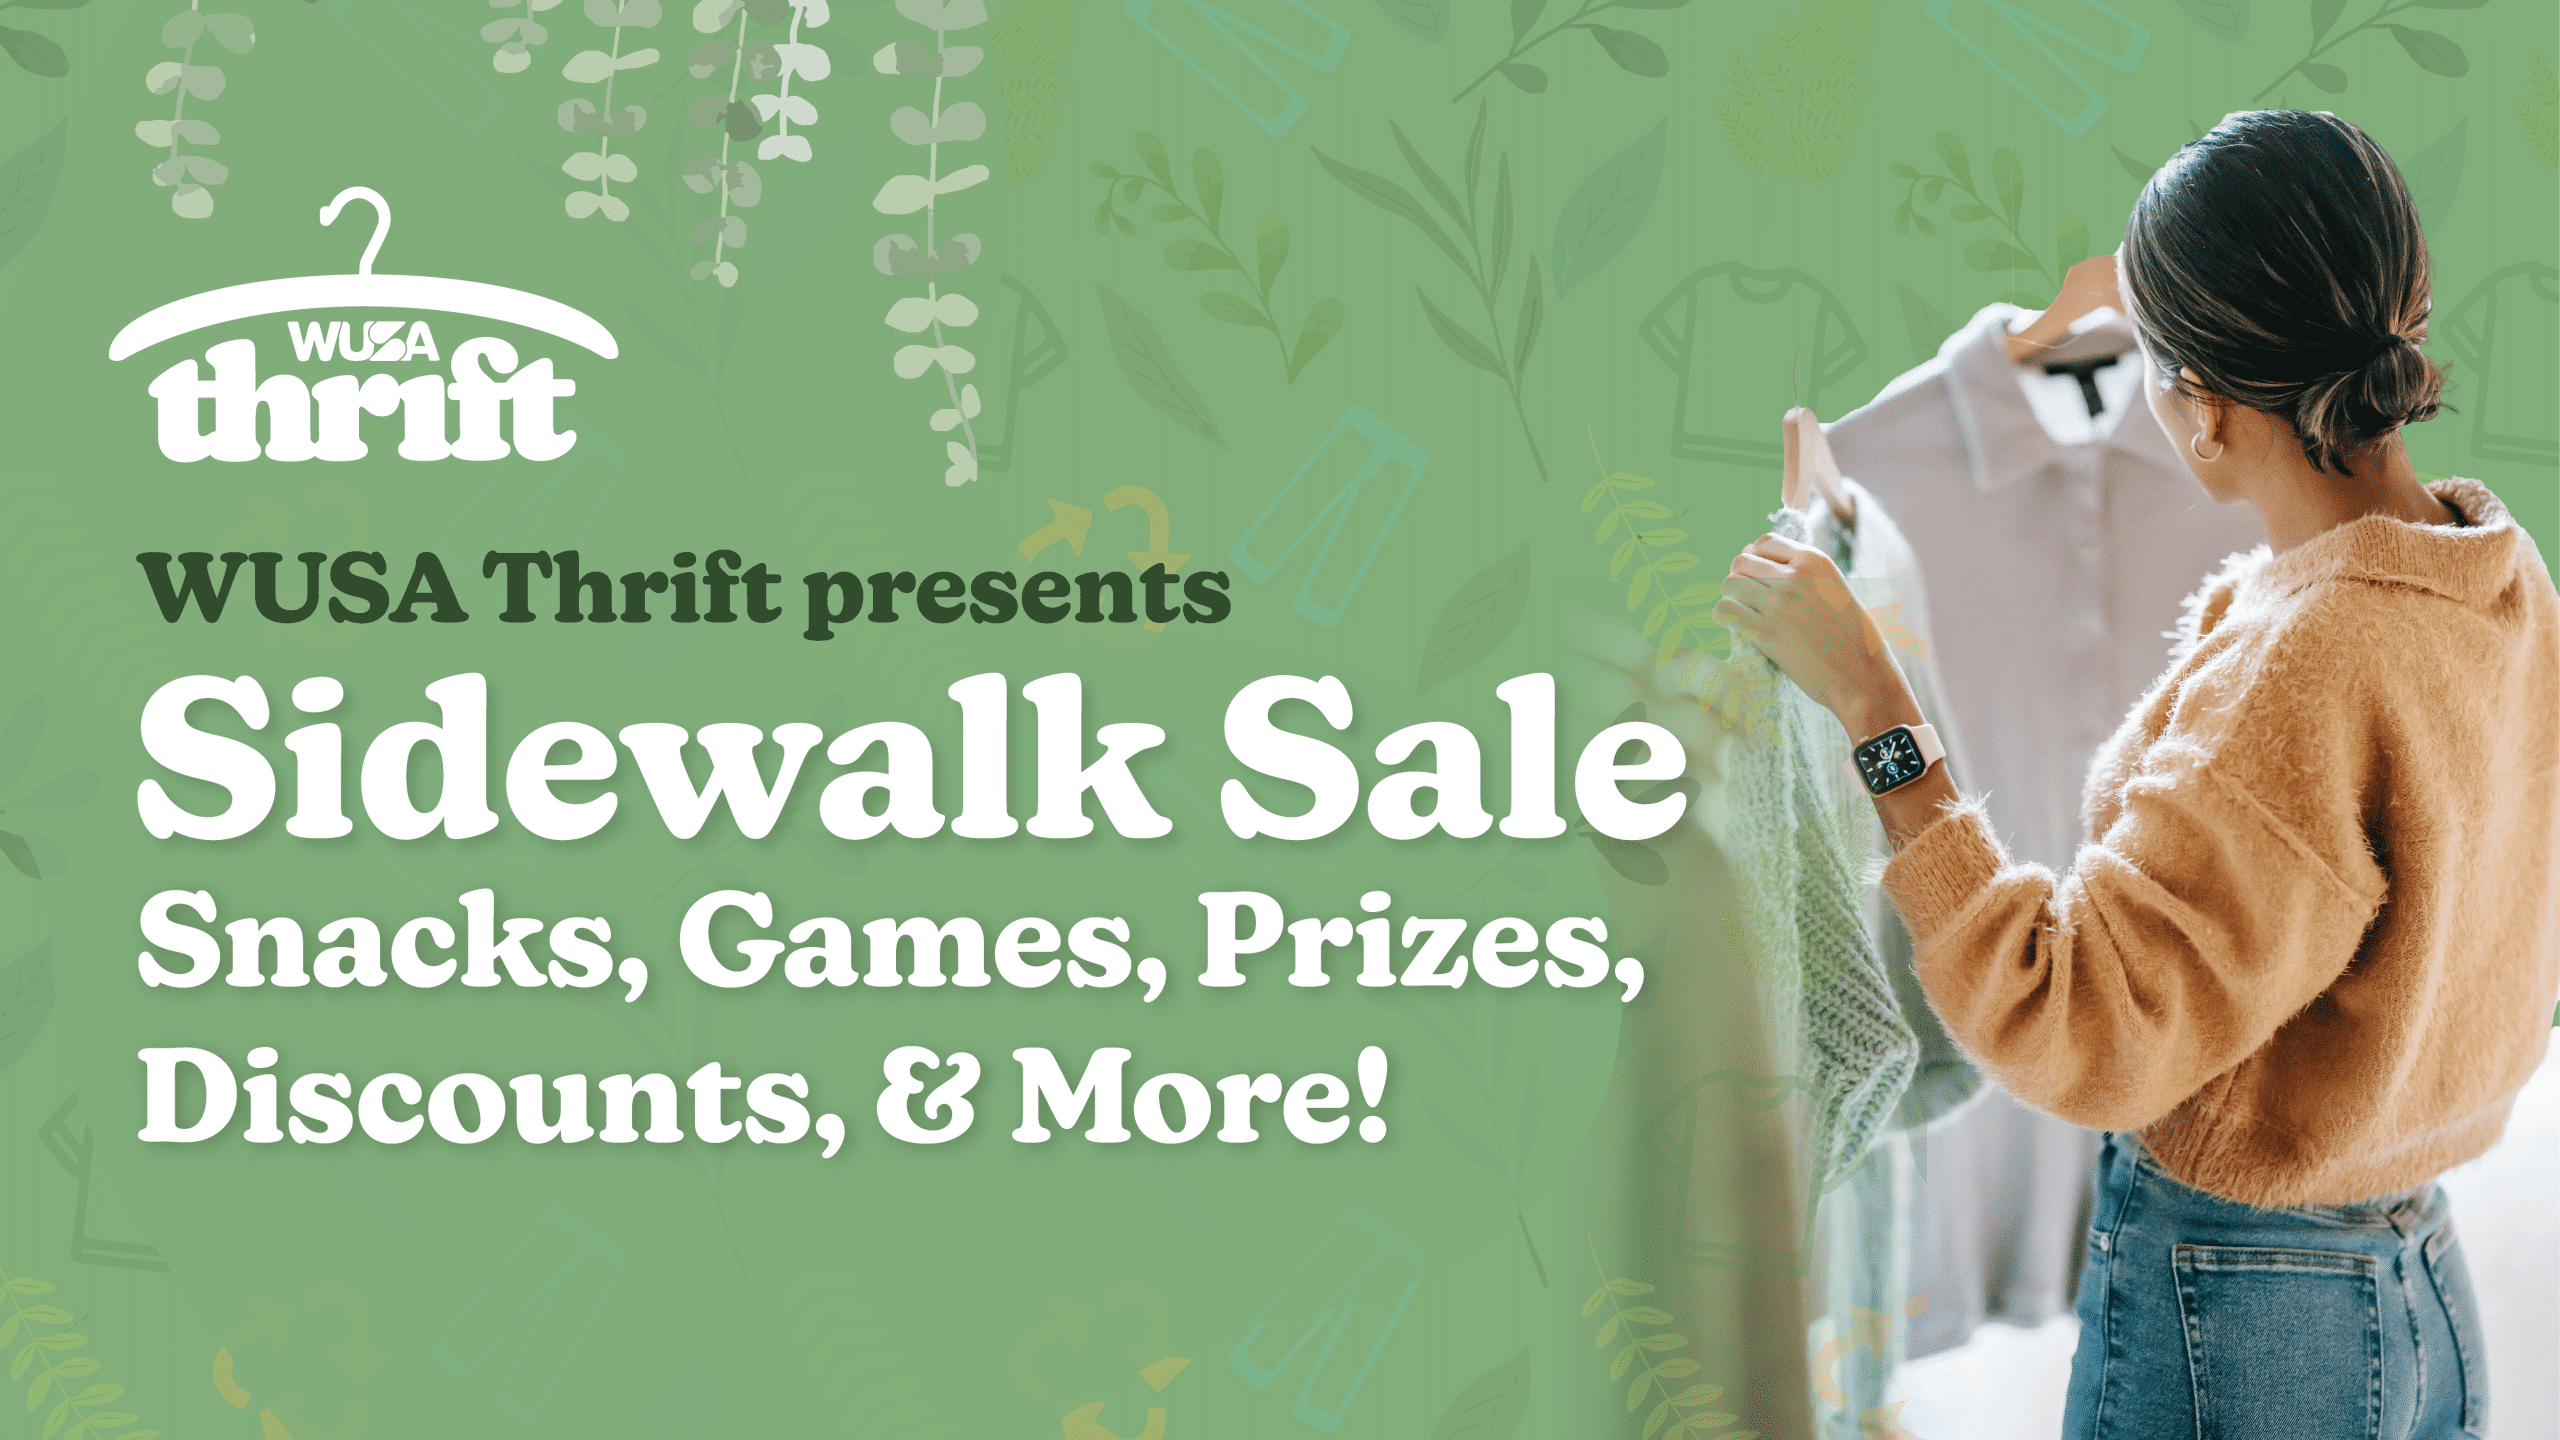 WUSA thrift presents Sidewalk sale. Snacks, Games Prizes, Discounts and More!